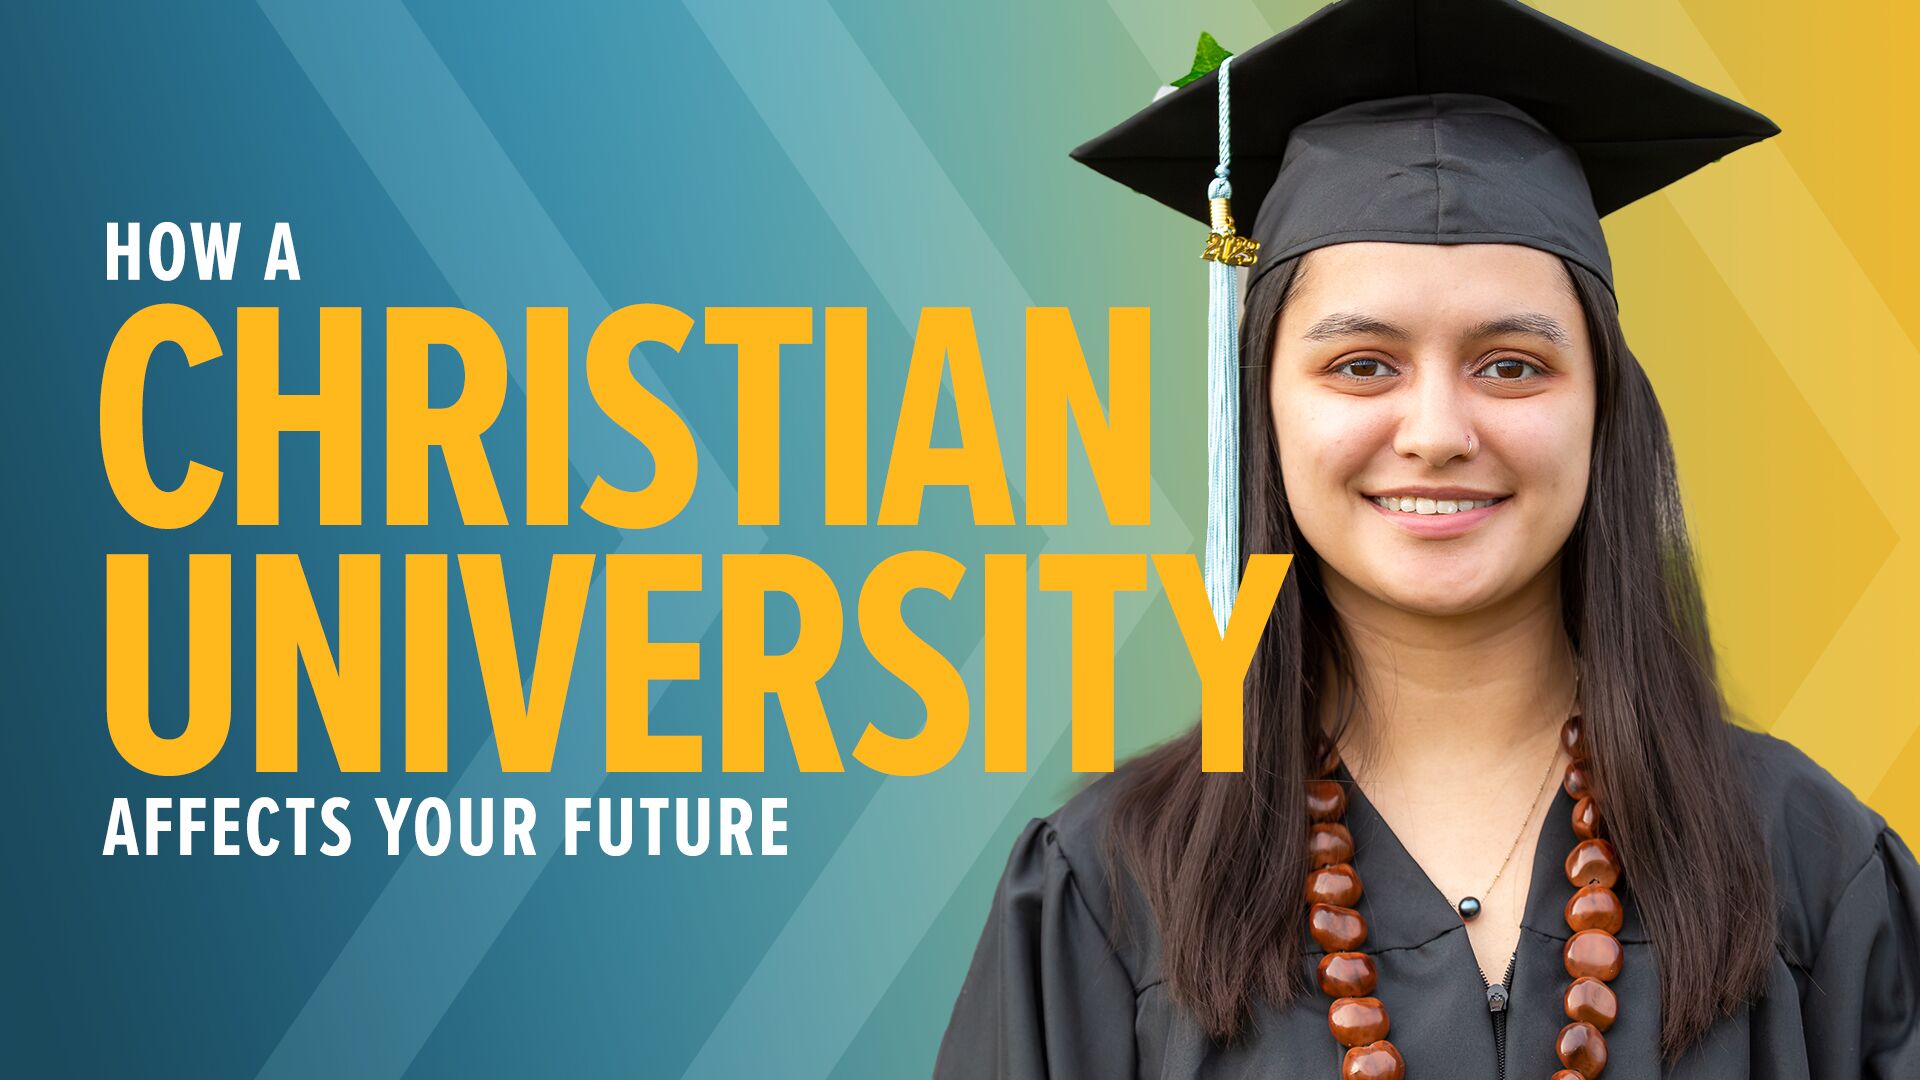 How a Christian University Affects Your Future